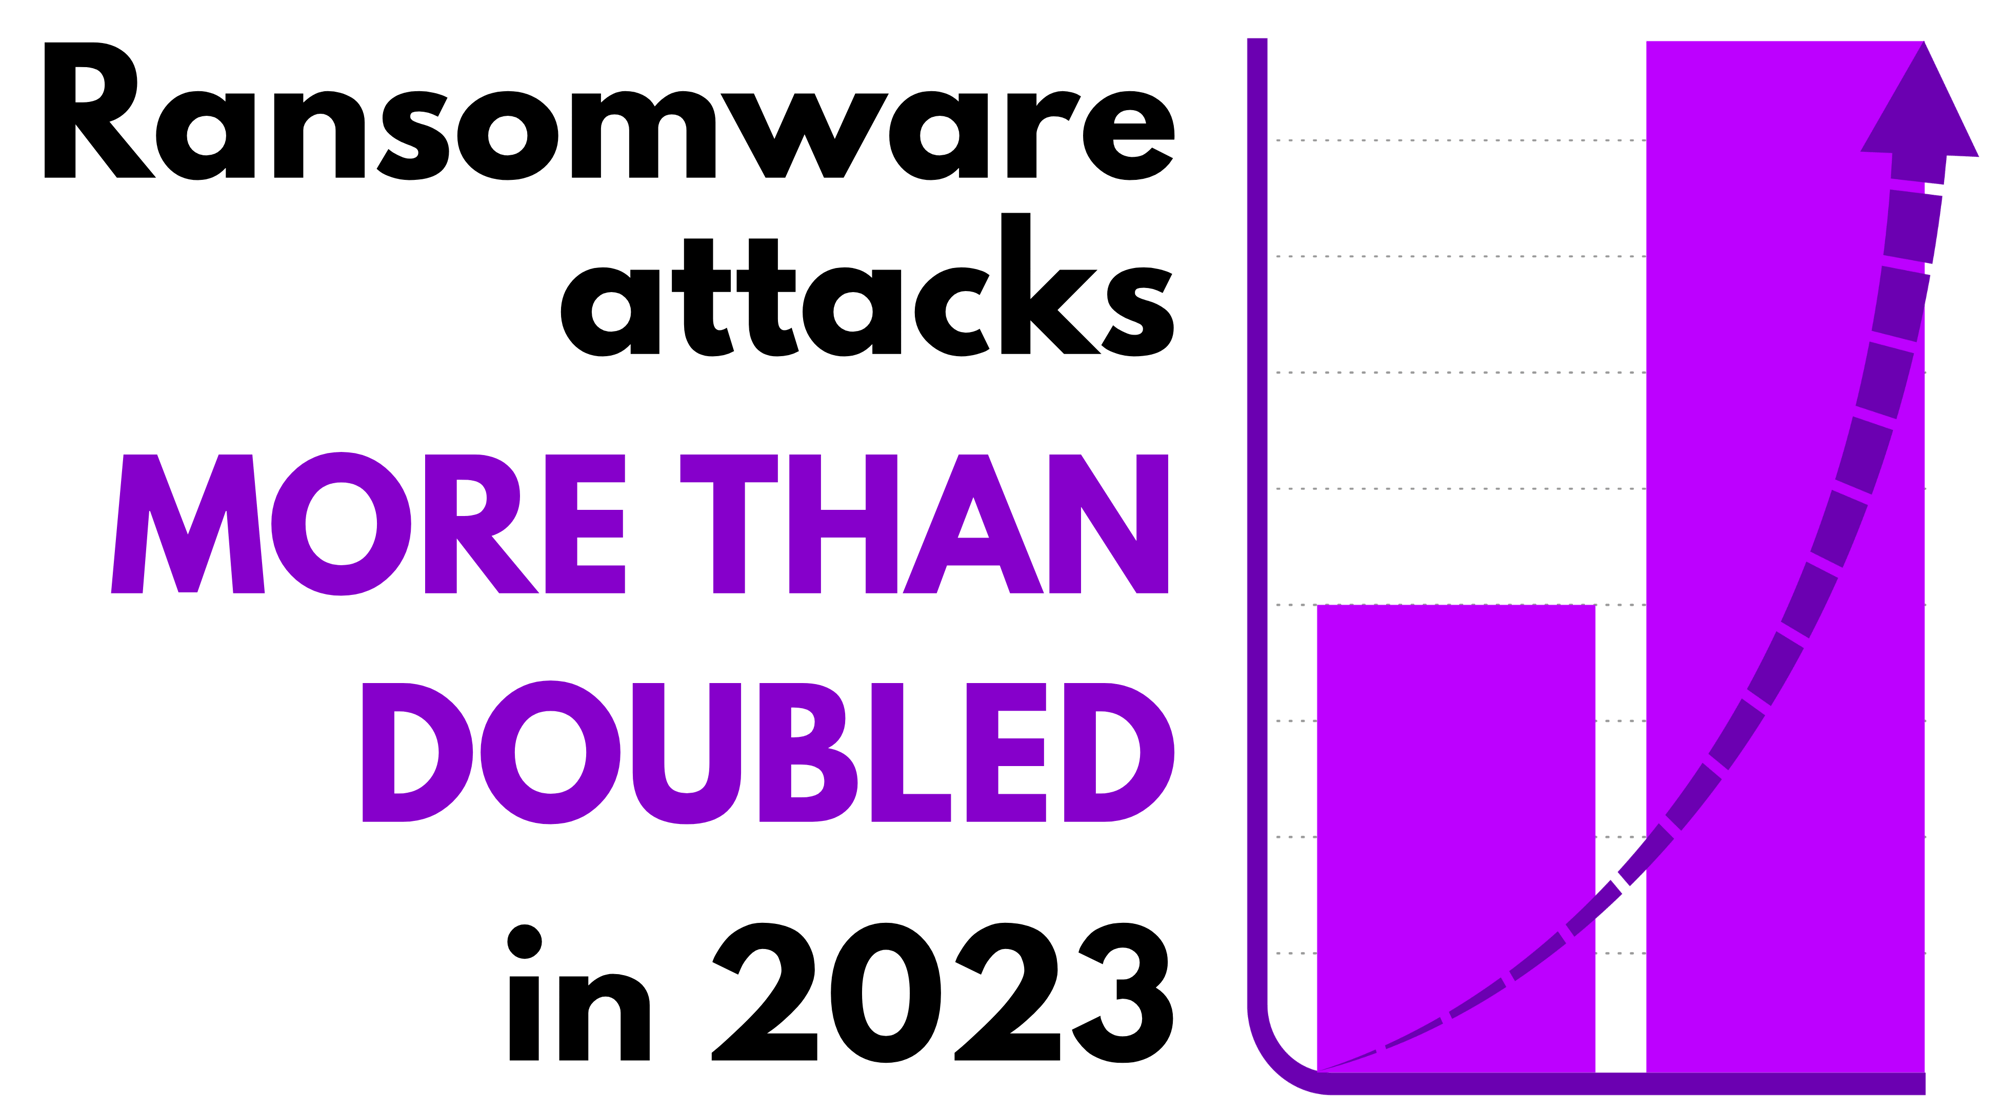 Ransomware attacks more than doubled in 2023